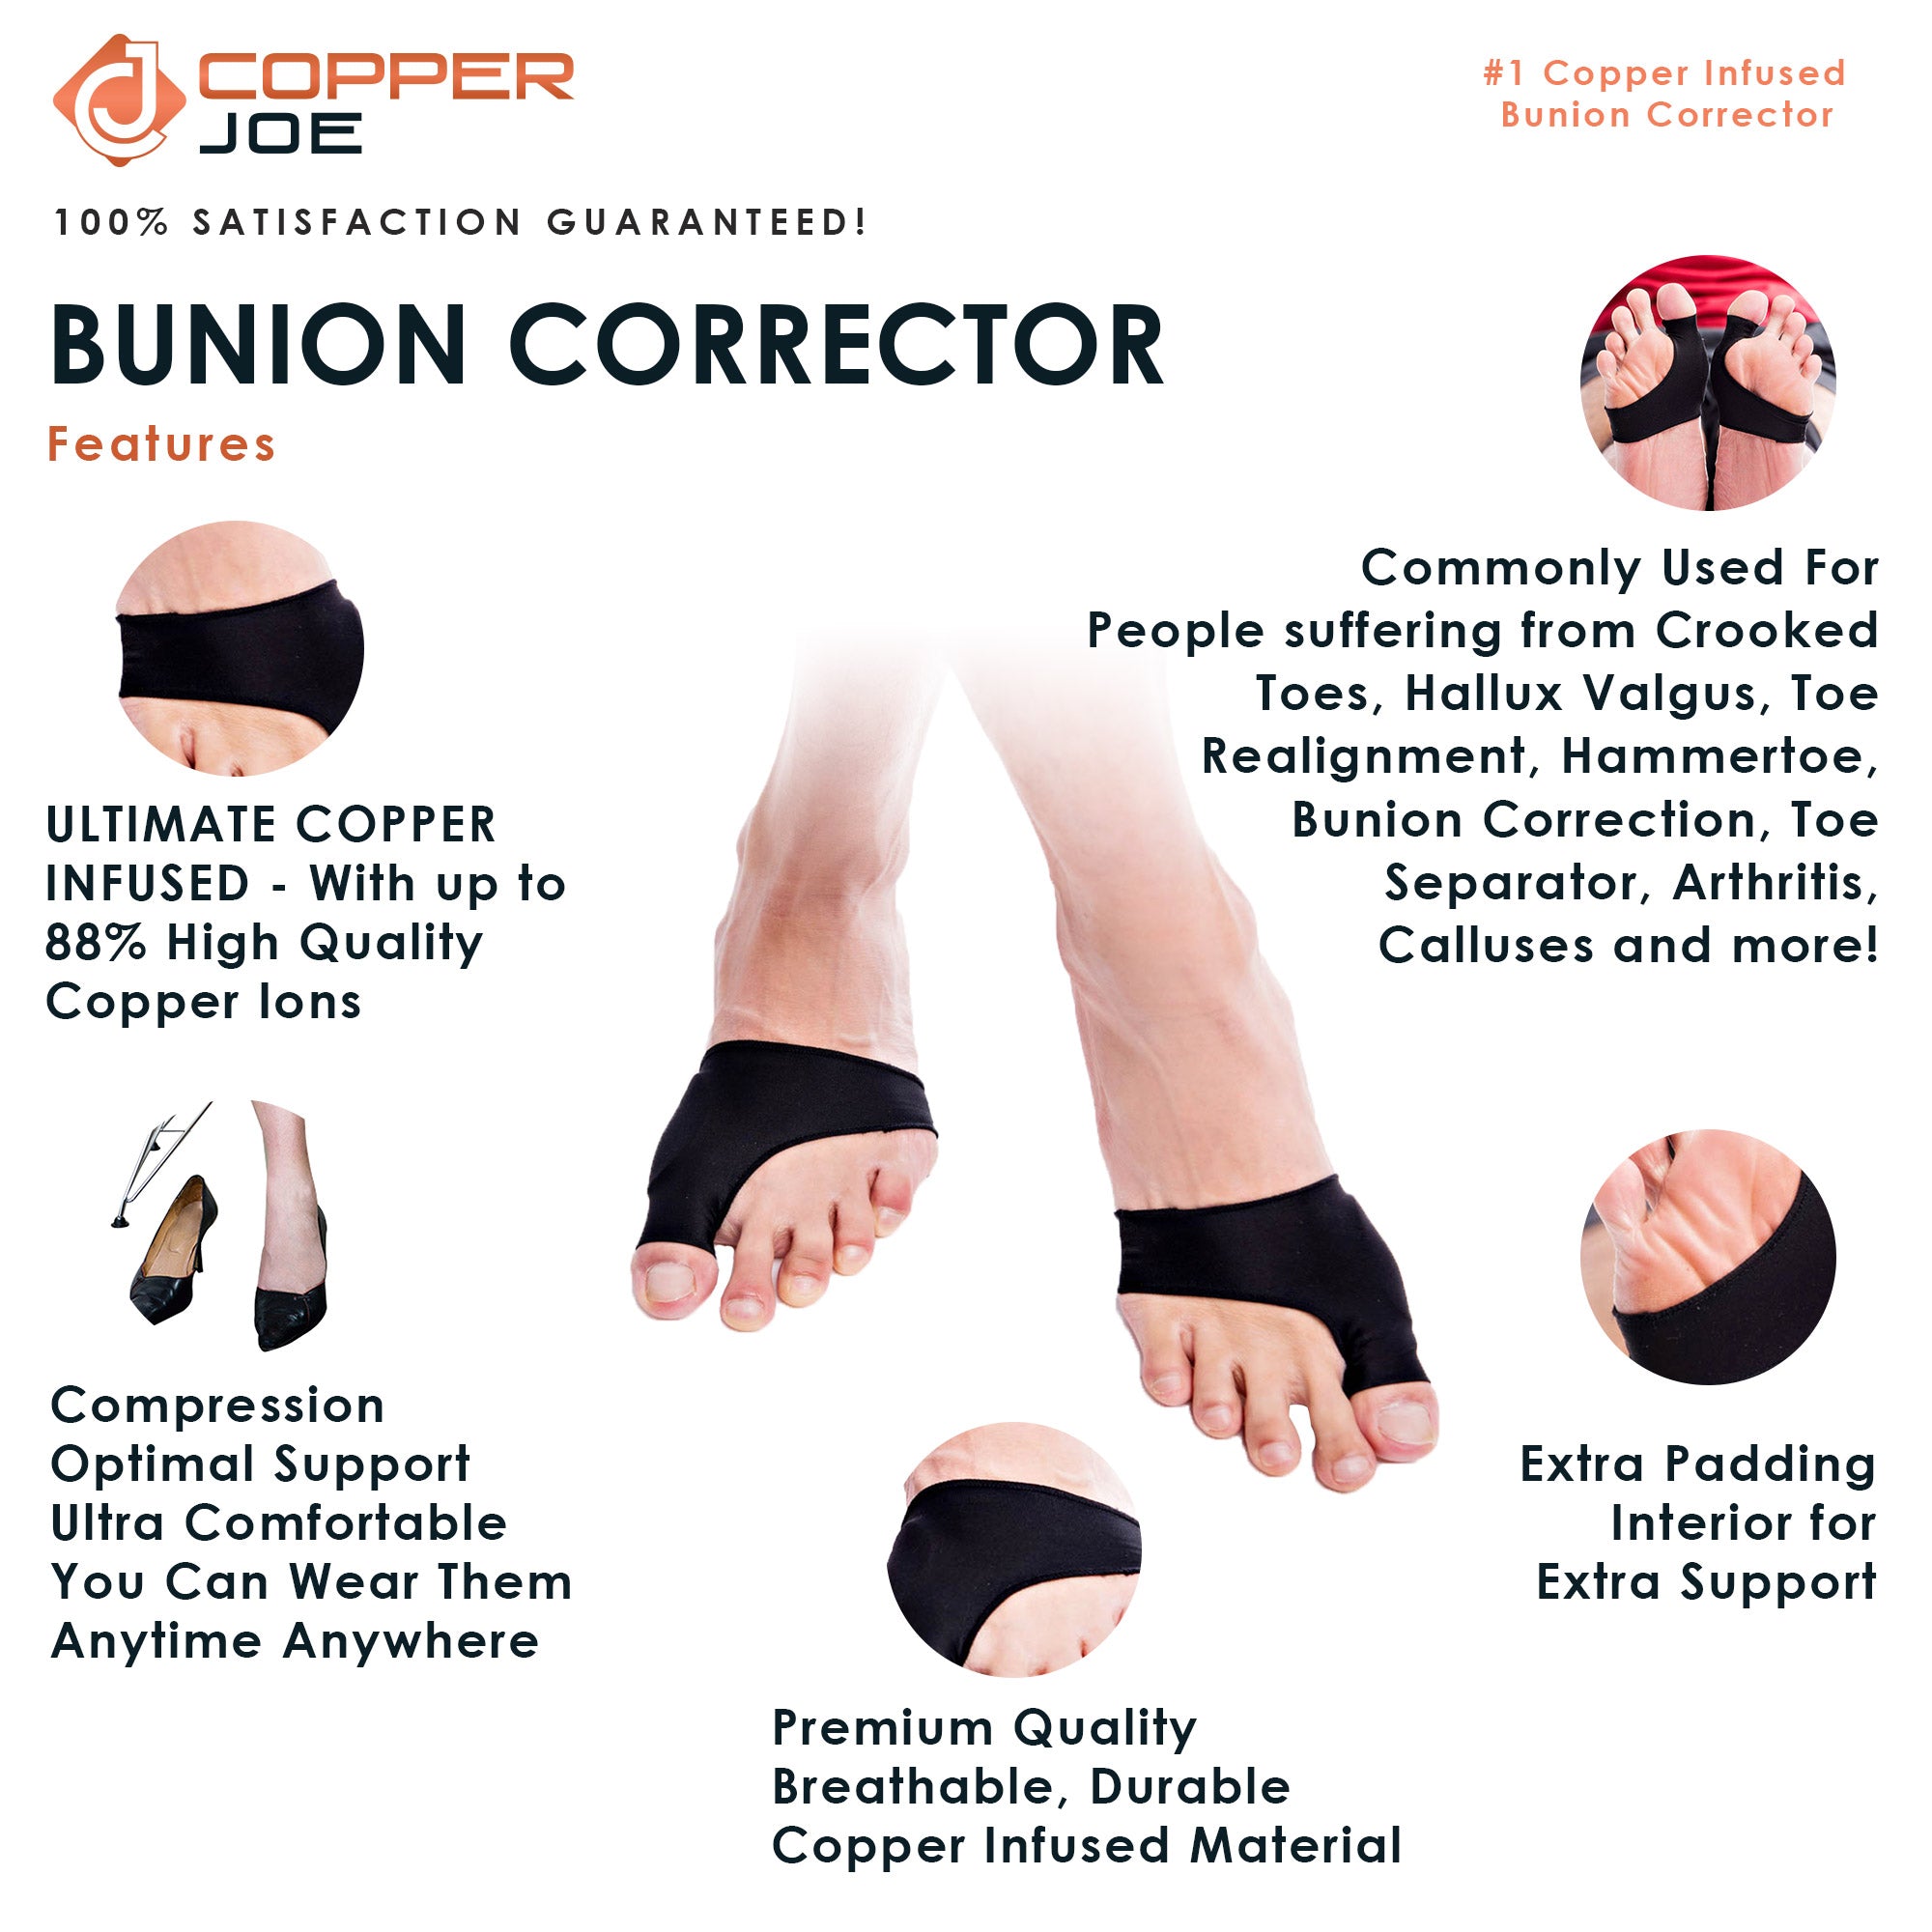 Copper Joe Big Toe Bunion Corrector Sleeves- Ultimate Copper Infused Compression Gel Pads Hallux Valgus Corrector and Shoe Friction Protector. Orthopedic Bunion Corrector- For Men and Women